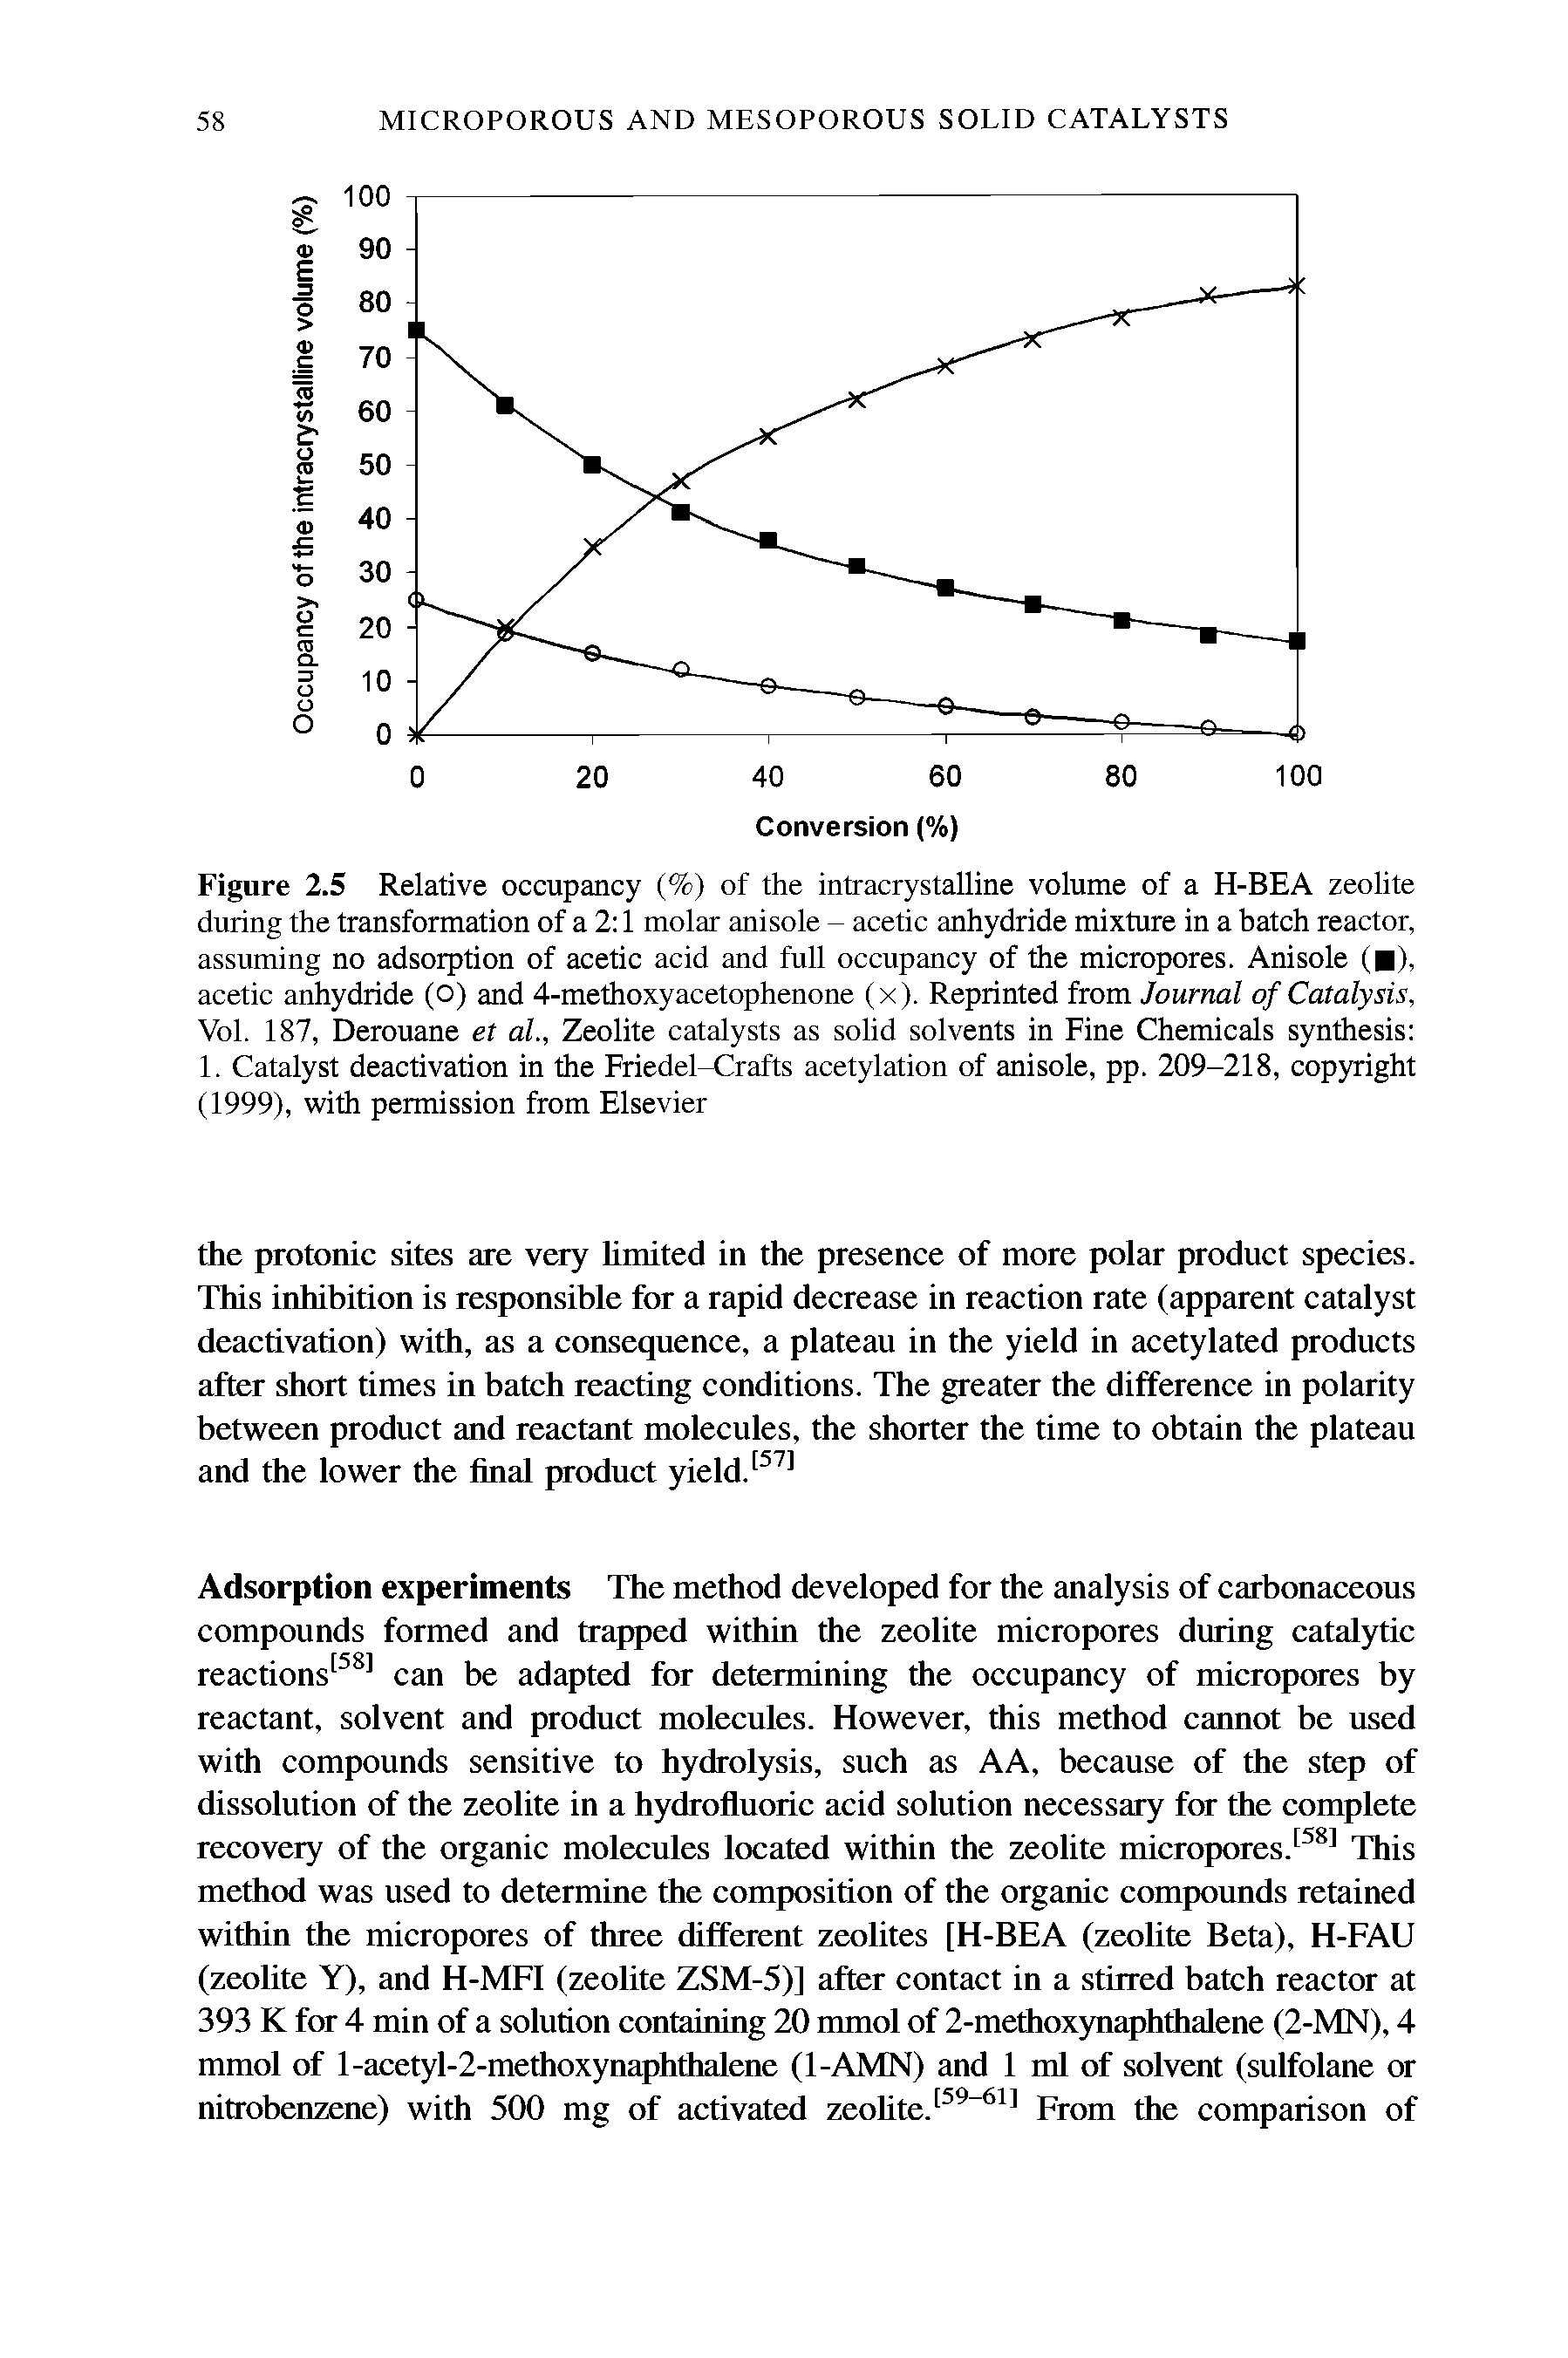 Figure 2.5 Relative occupancy (%) of the intracrystalline volume of a H-BEA zeolite during the transformation of a 2 1 molar anisole - acetic anhydride mixture in a batch reactor, assuming no adsorption of acetic acid and full occupancy of the micropores. Anisole ( ), acetic anhydride (o) and 4-methoxyacetophenone (x). Reprinted from Journal of Catalysis, Vol. 187, Derouane et al., Zeolite catalysts as solid solvents in Fine Chemicals synthesis 1. Catalyst deactivation in the Friedel-Crafts acetylation of anisole, pp. 209-218, copyright (1999), with permission from Elsevier...